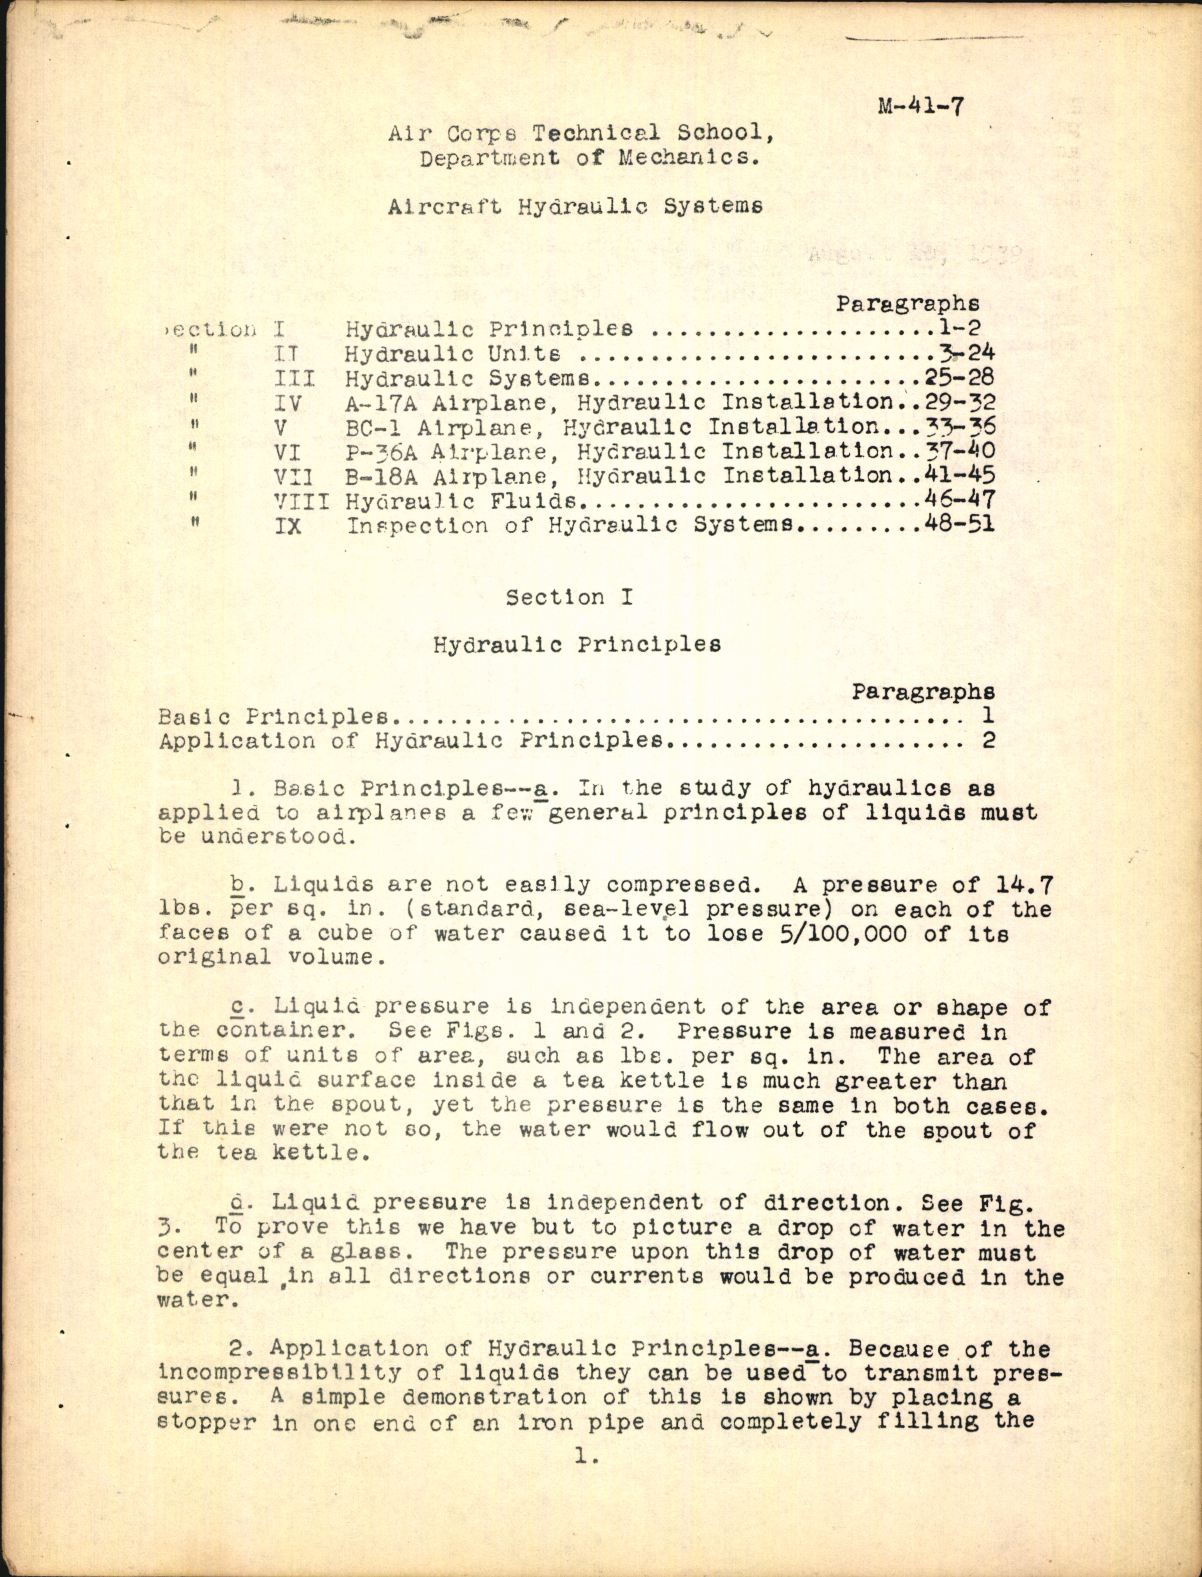 Sample page 7 from AirCorps Library document: Air Corps Technical Schools; Aircraft Hydraulic Systems